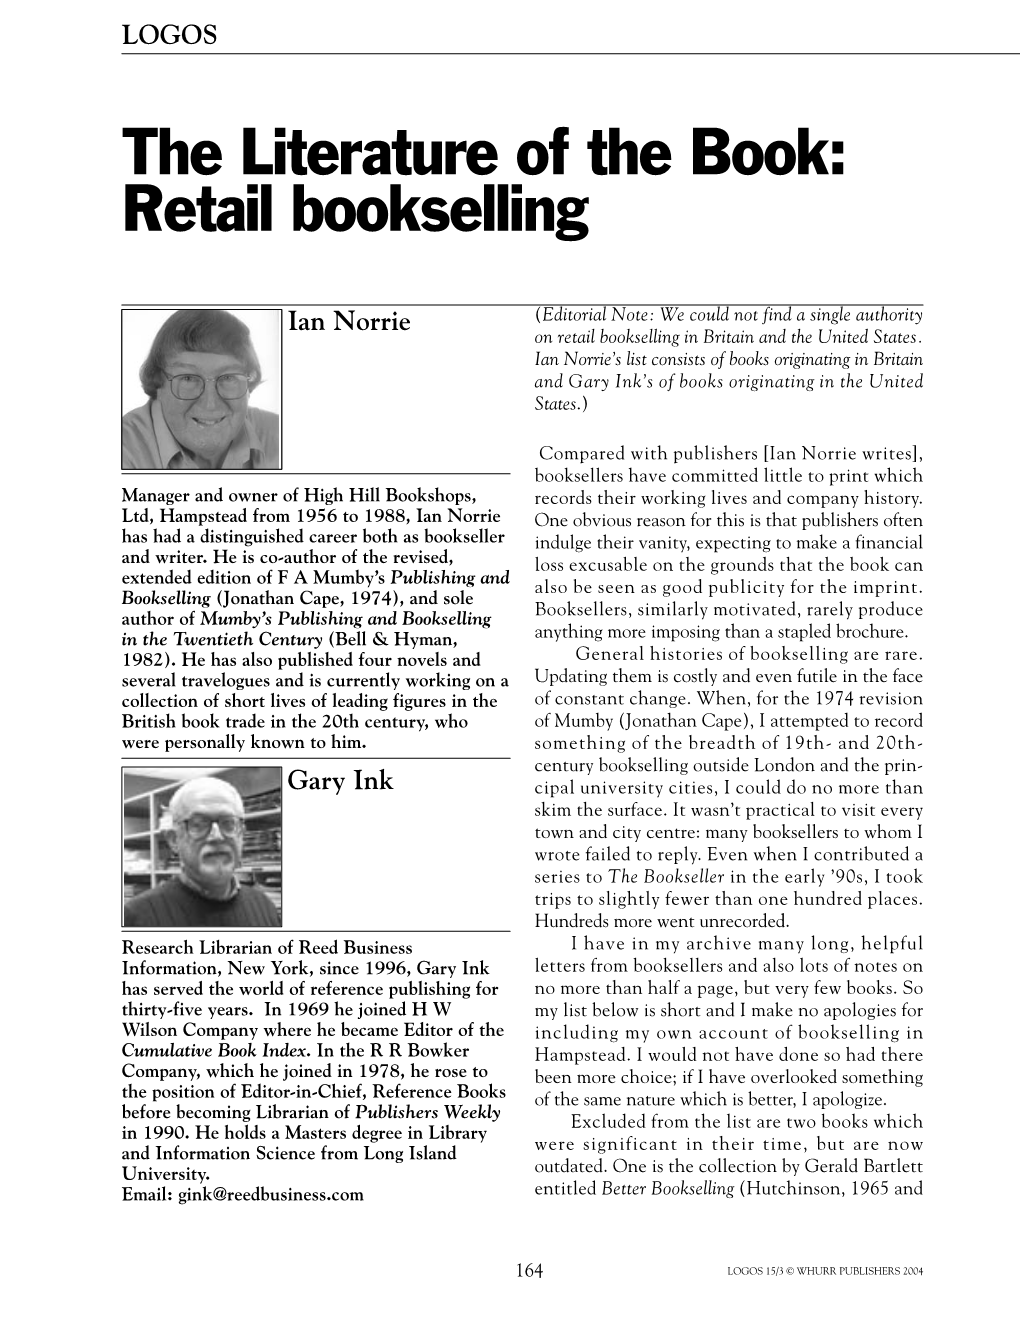 Retail Bookselling